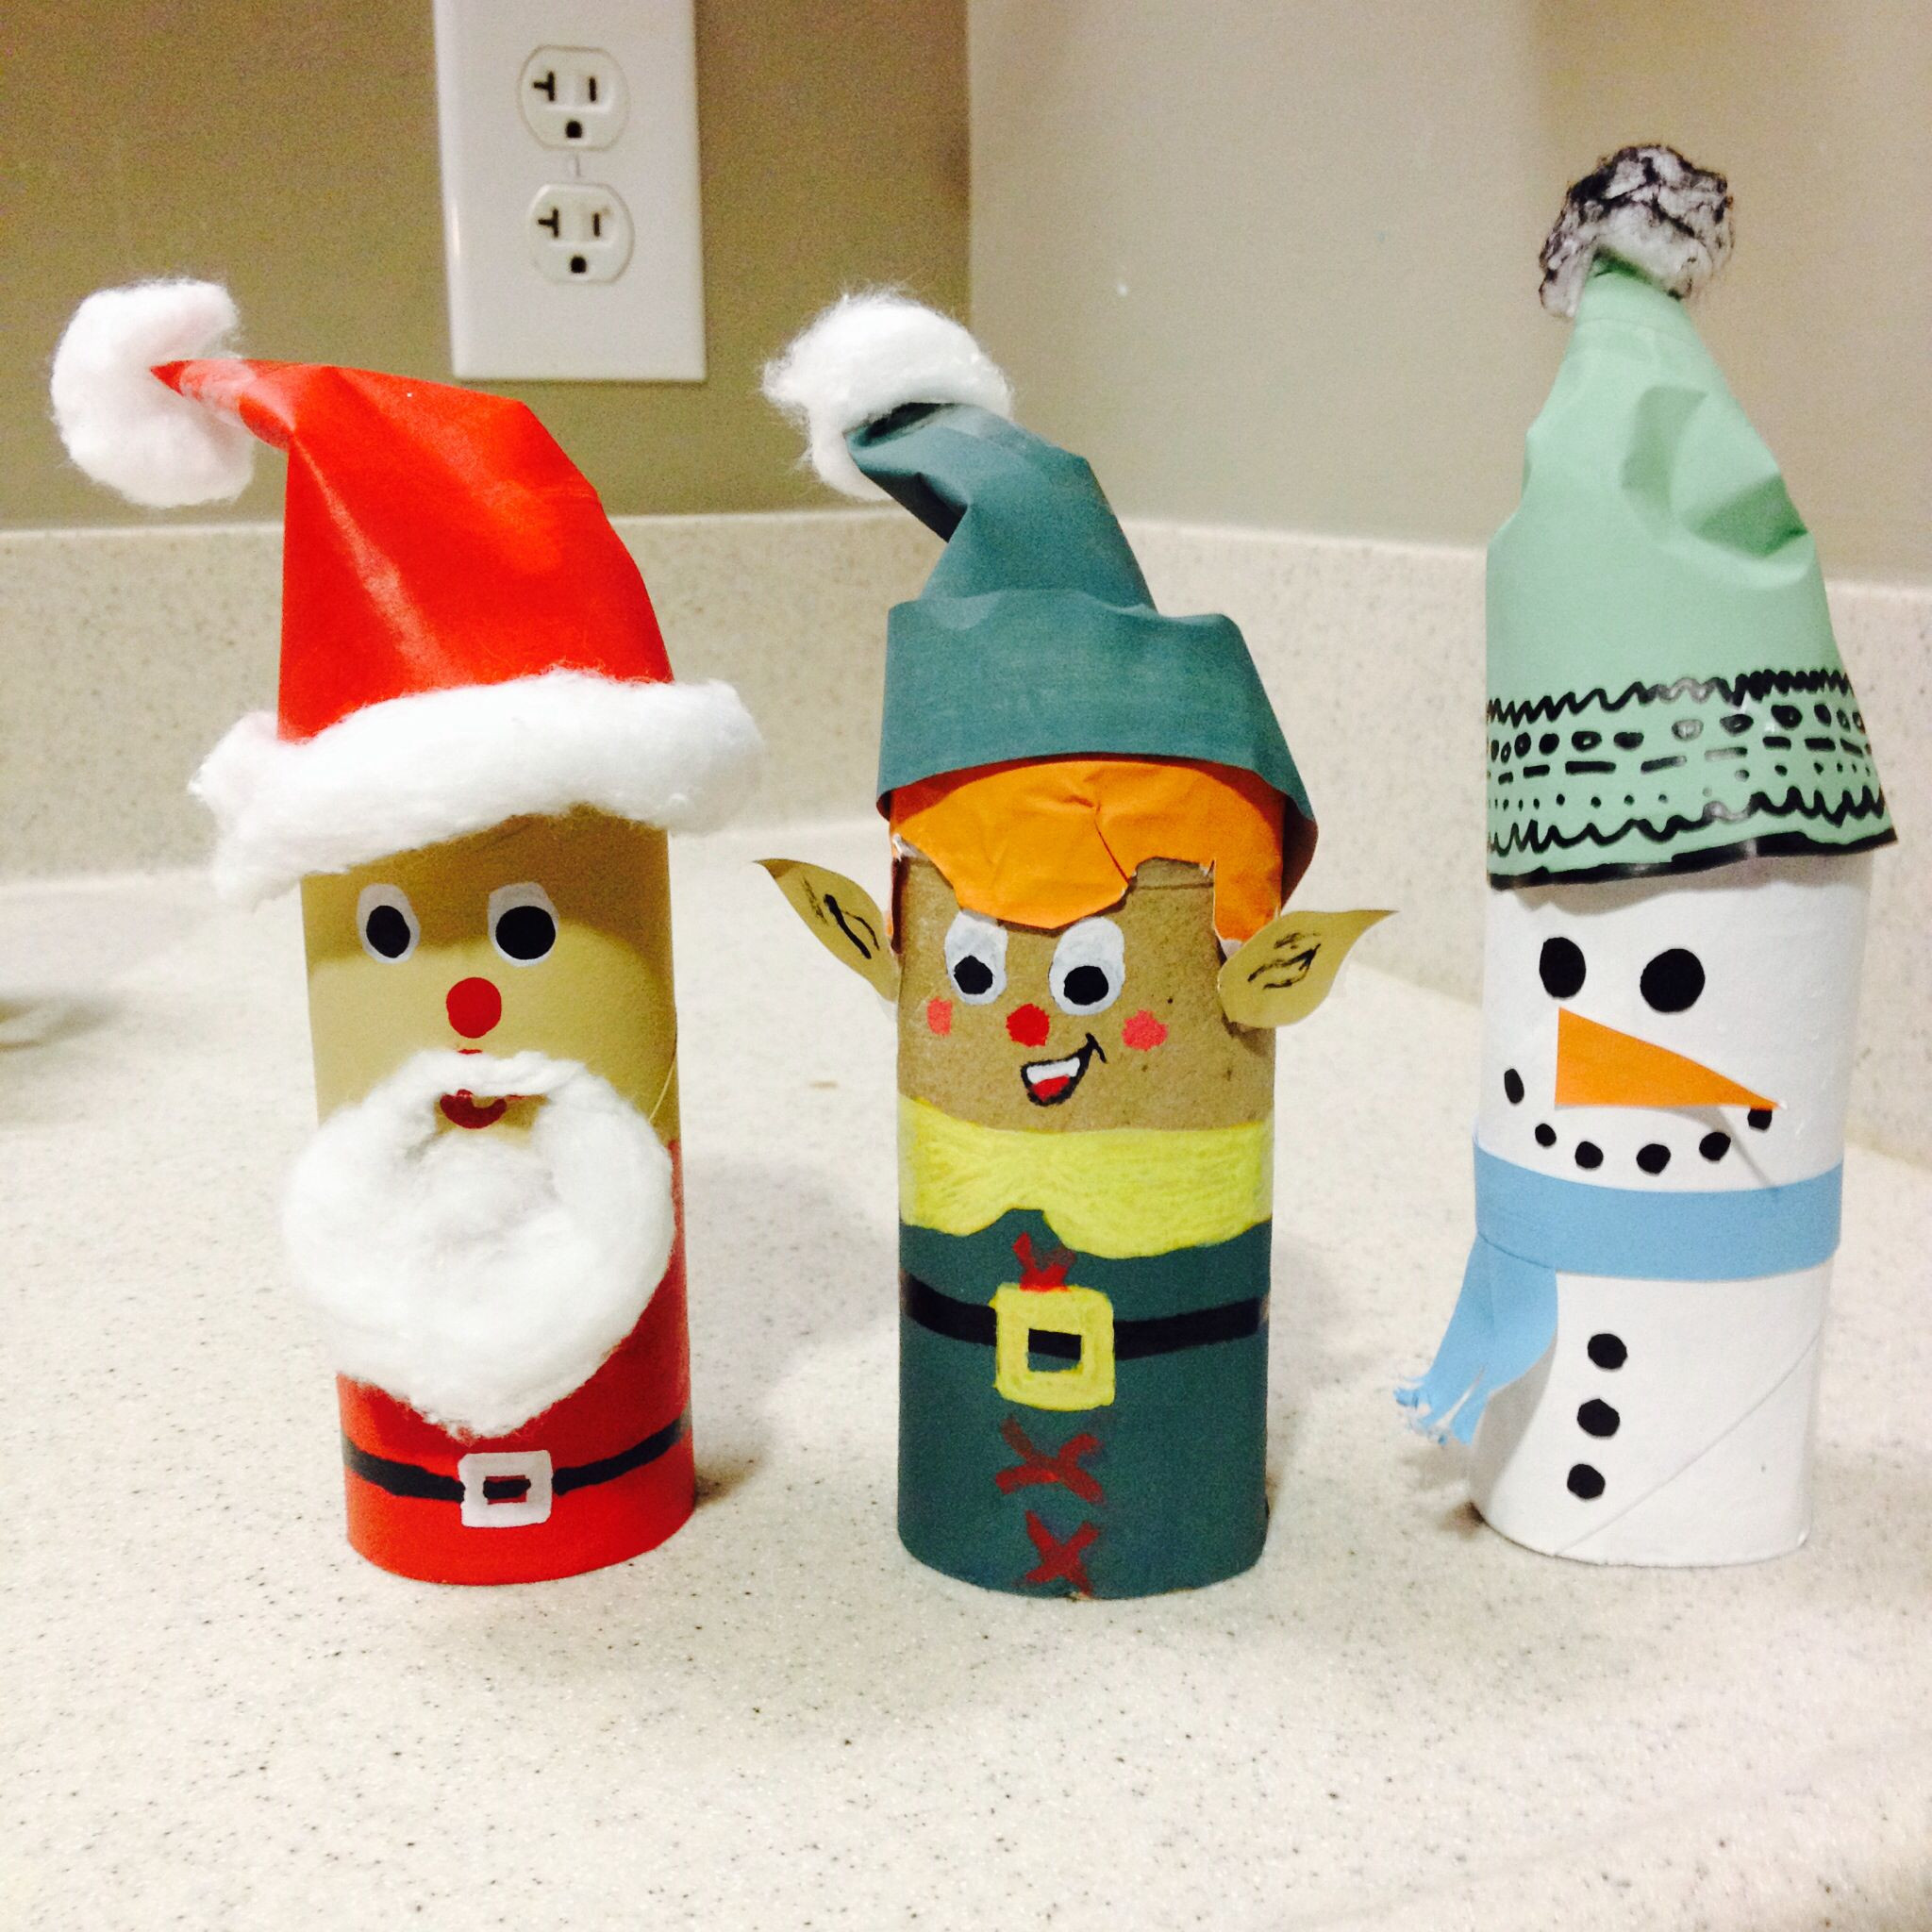 Toilet Paper Roll Crafts Christmas
 Toilet paper roll Christmas decorations